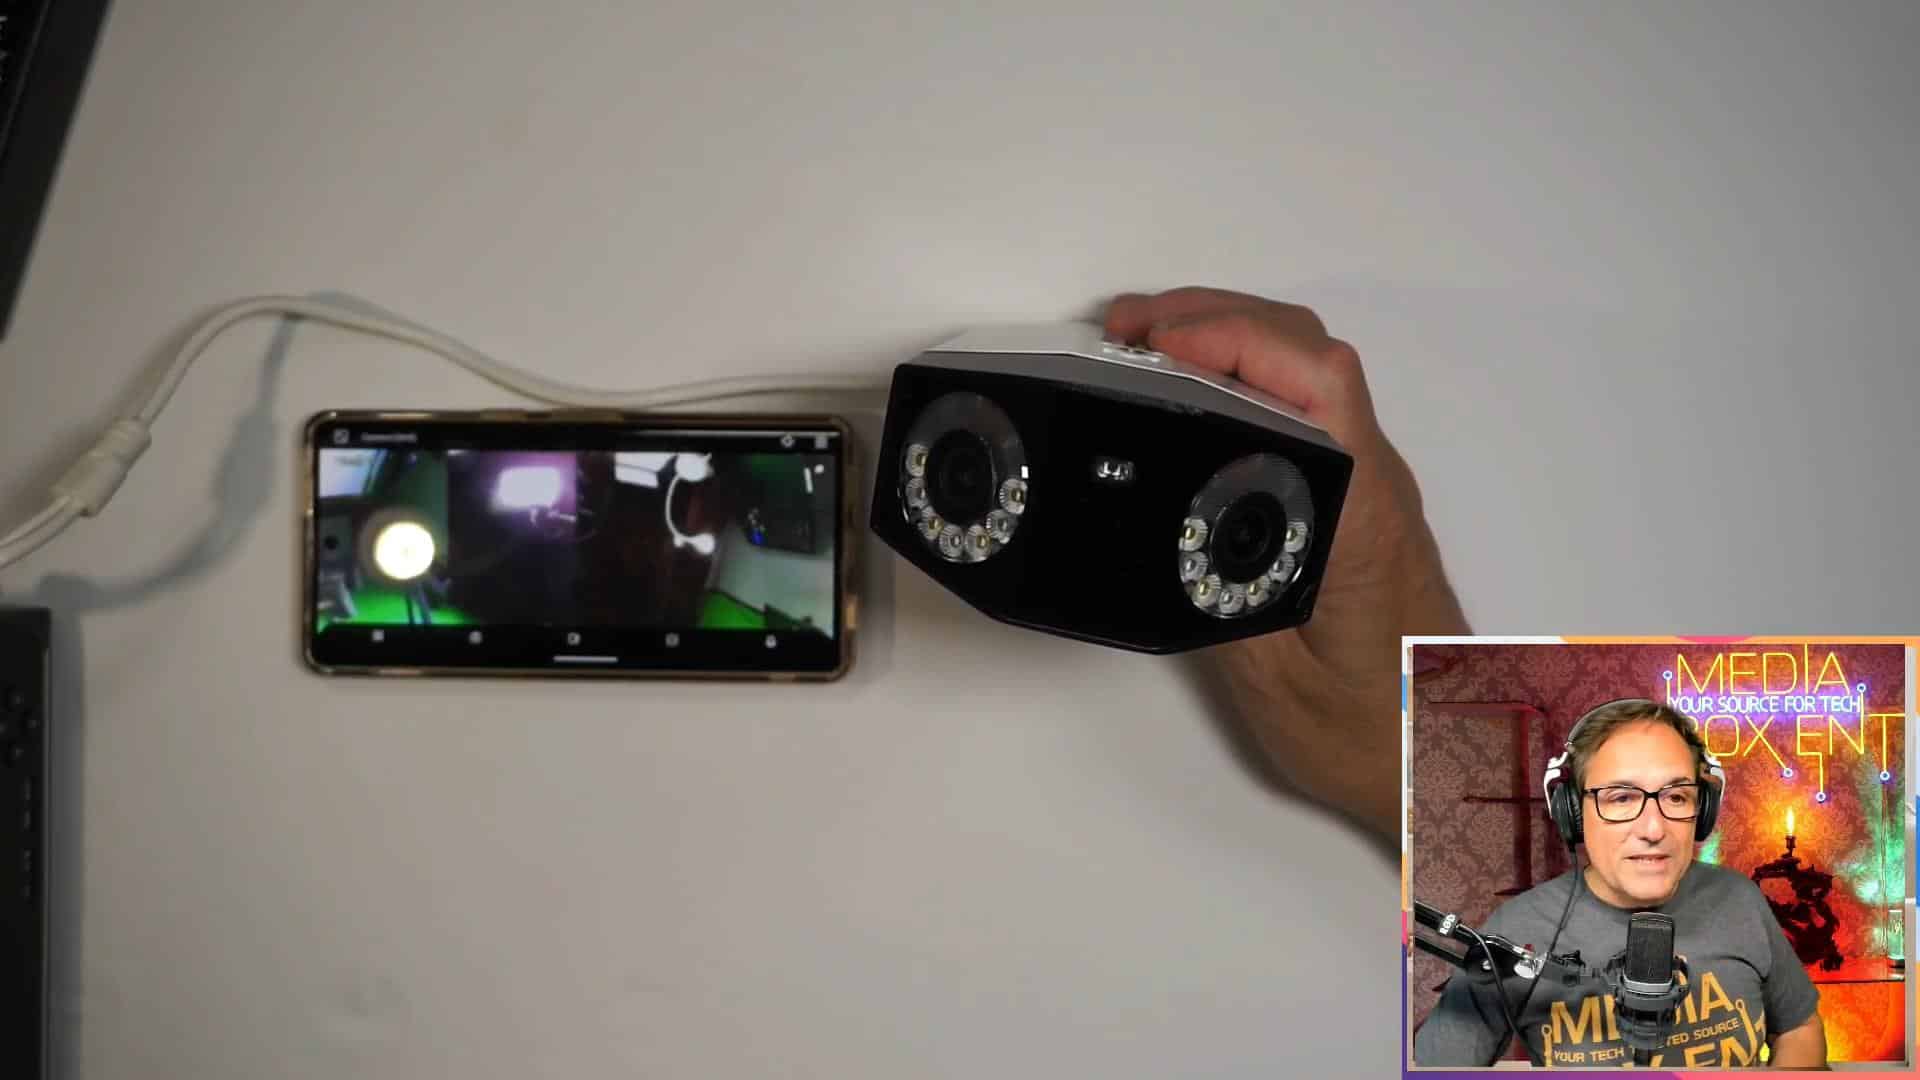 Technology reviewer holds a REOLINK 4K PoE security camera in hand with its live feed visible on a smartphone, illustrating the camera’s functionality and connectivity.